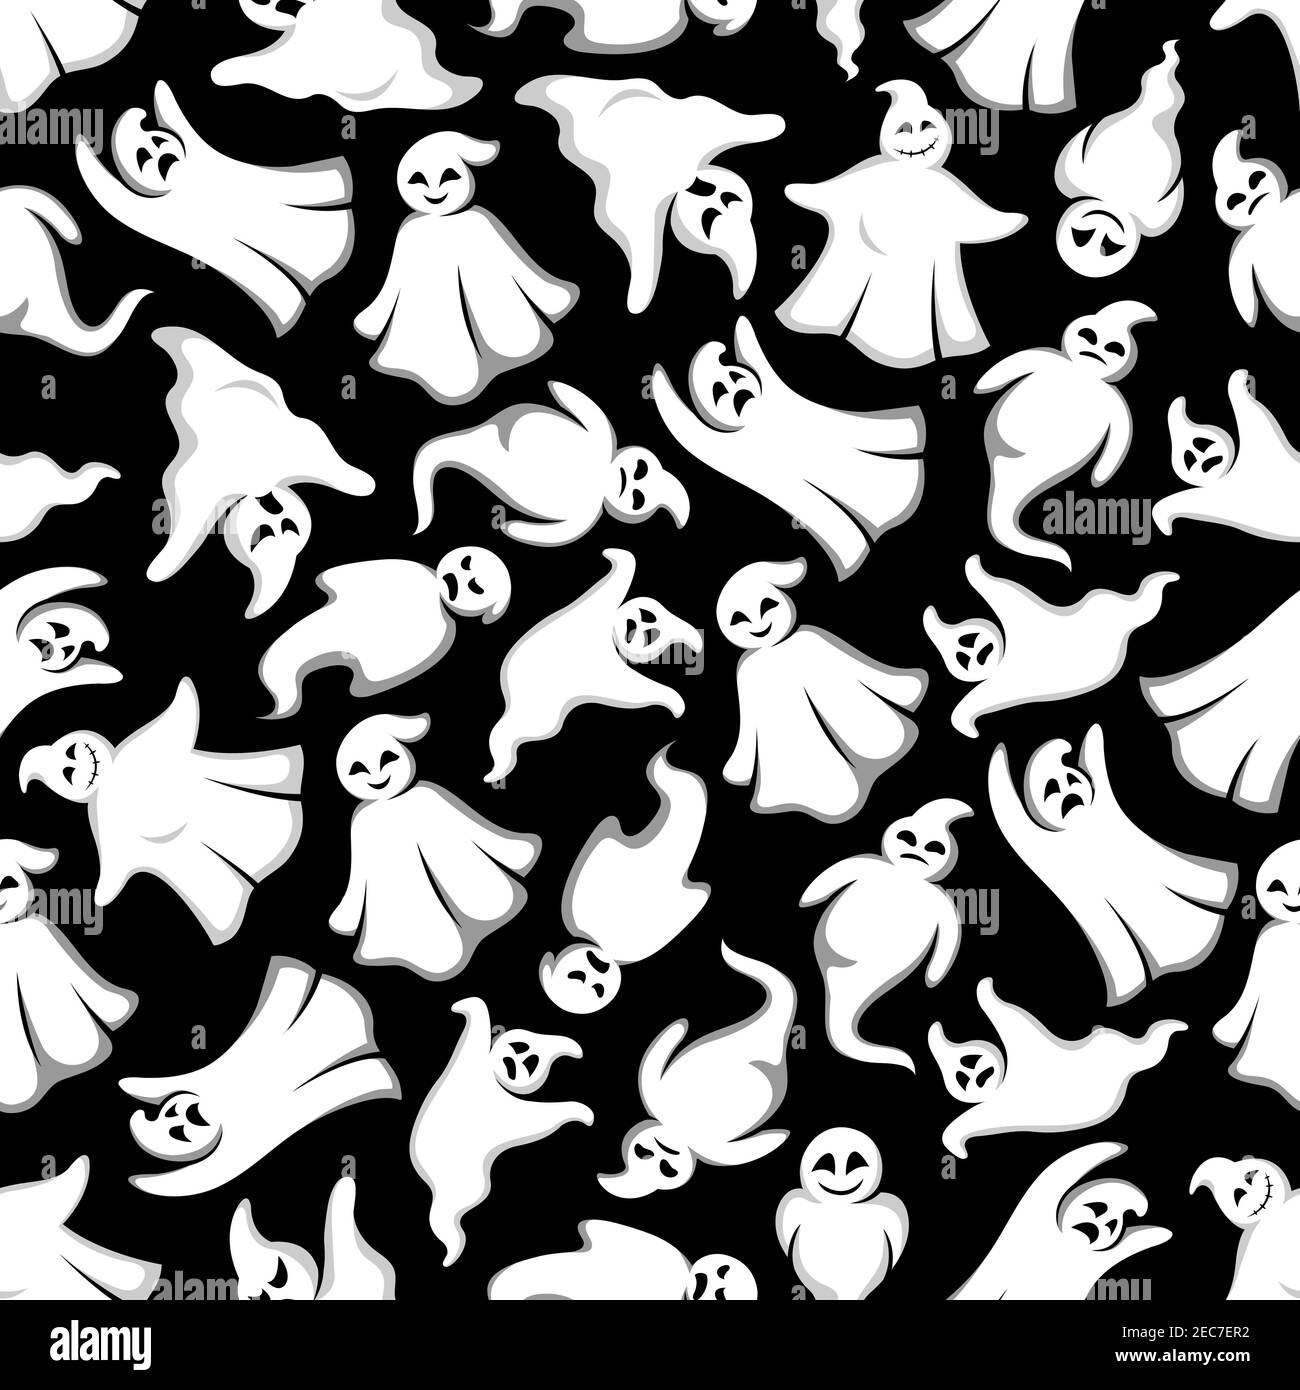 Cartoon Halloween Ghosts seamless background. Cute spooks characters with face expressions. Smiling, laughing, scary, angry, indifferent, serious, shy Stock Vector